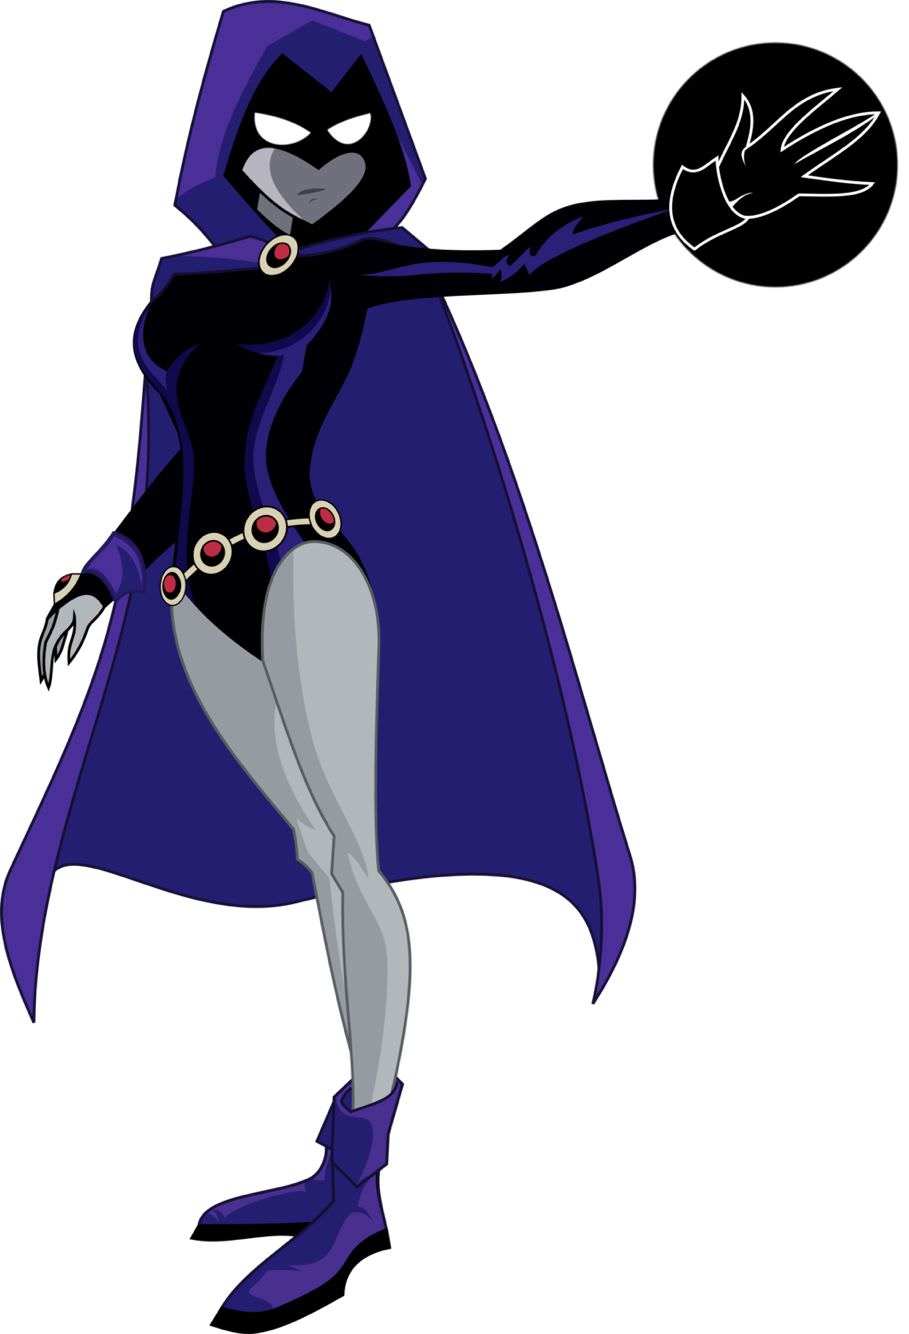 brittany totten recommends images of raven from teen titans pic